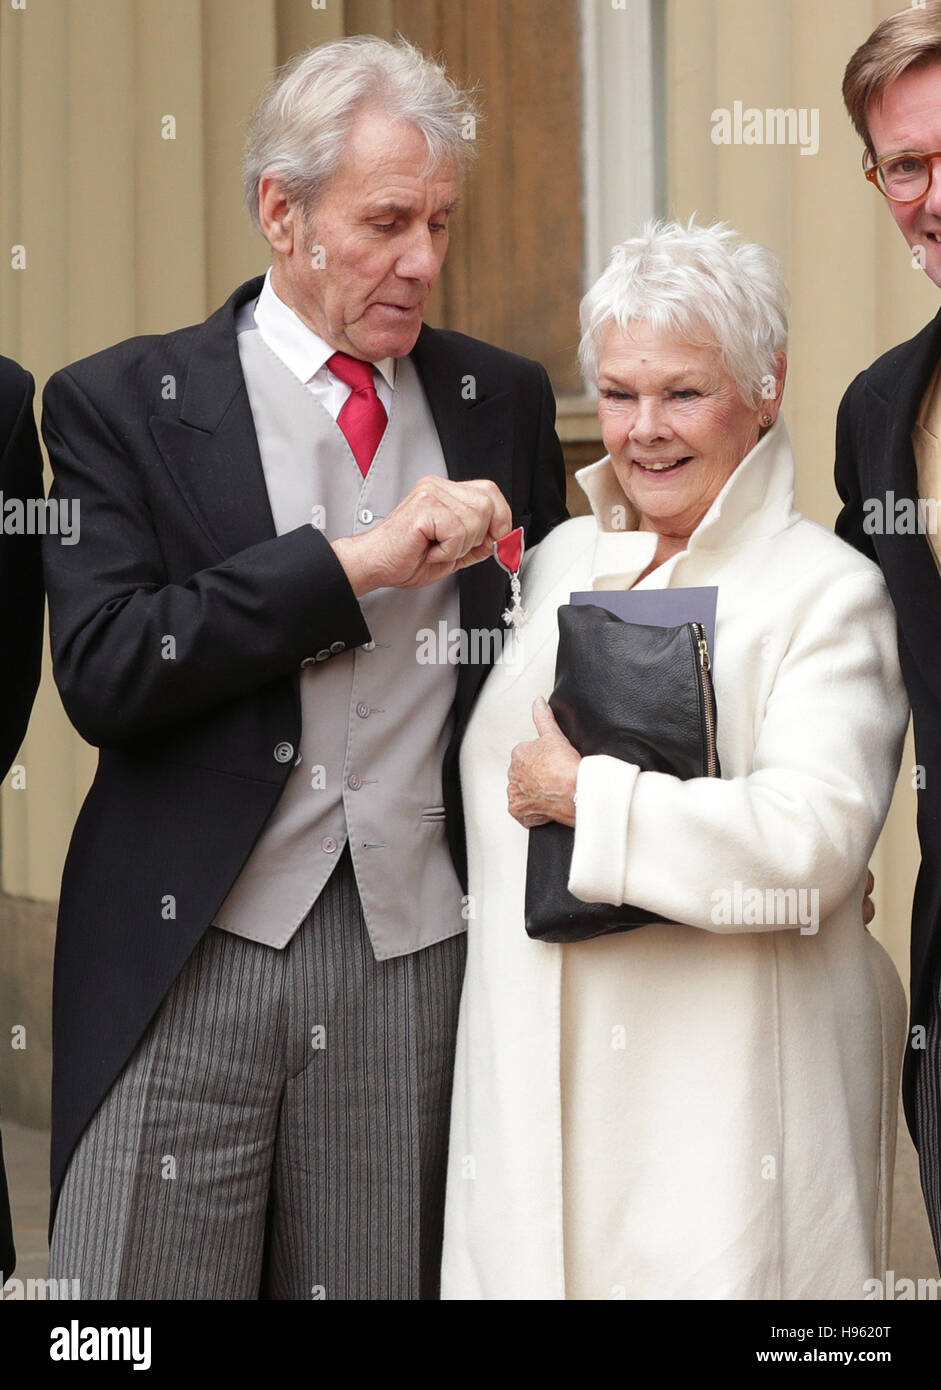 Dame Judi Dench with David Mills with his MBE which he received by the Prince of Wales during an Investiture ceremony at Buckingham Palace, London. Stock Photo